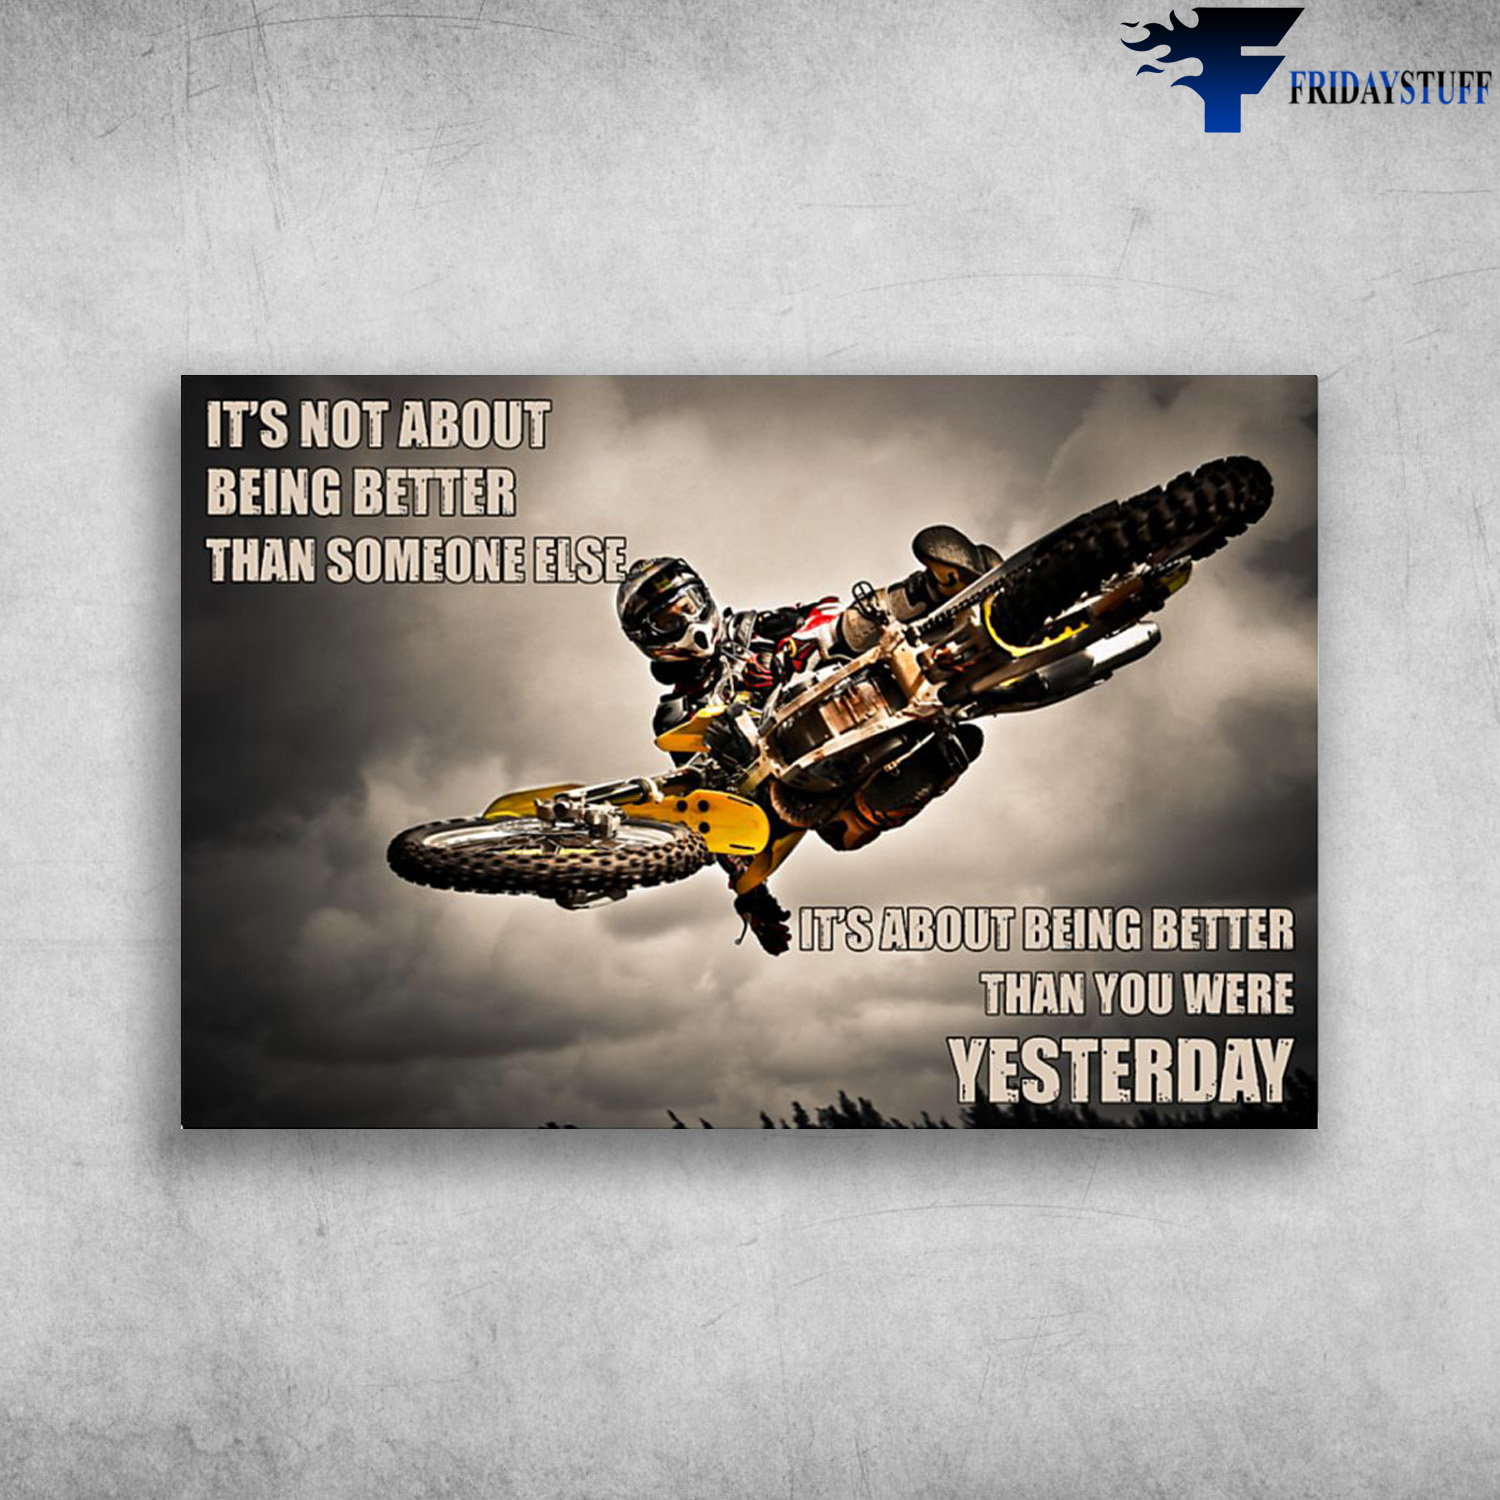 Motocross Man - It's Not About Being Better Than Someone Else, It's About Being Better Than You Were Yesterday